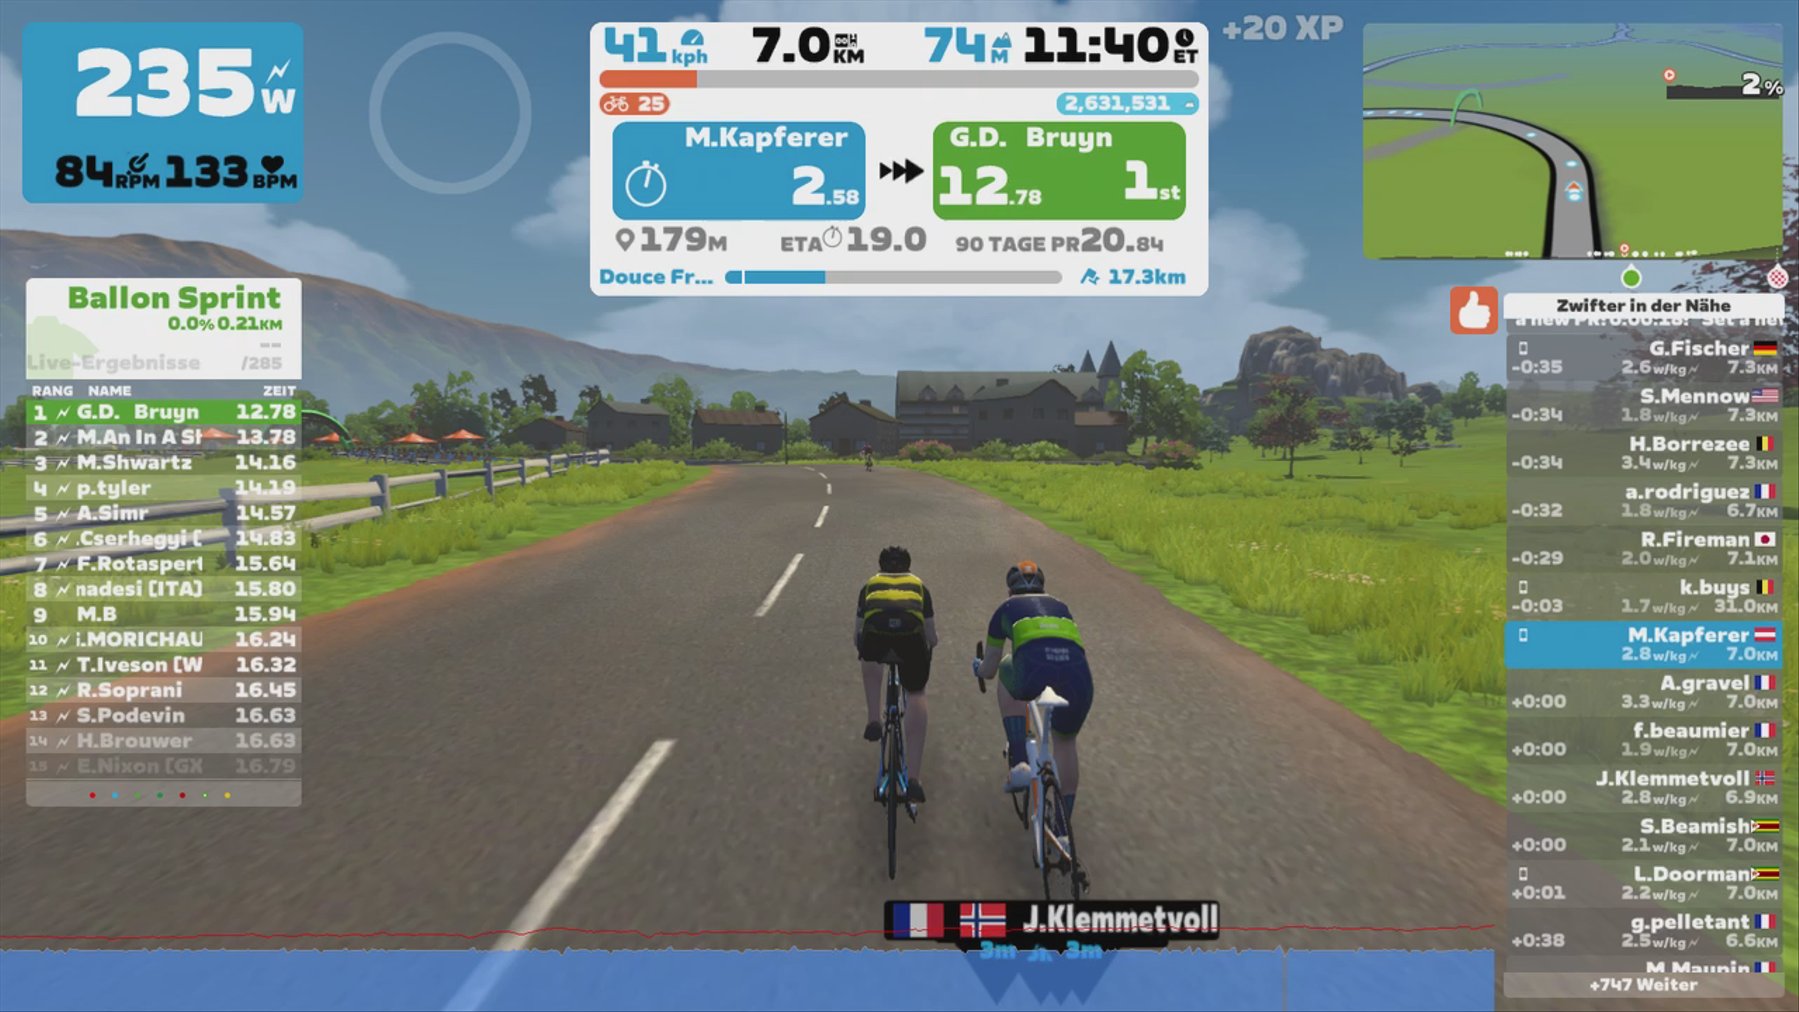 Zwift - Group Ride: The Herd Gallops (C) on Douce France in France